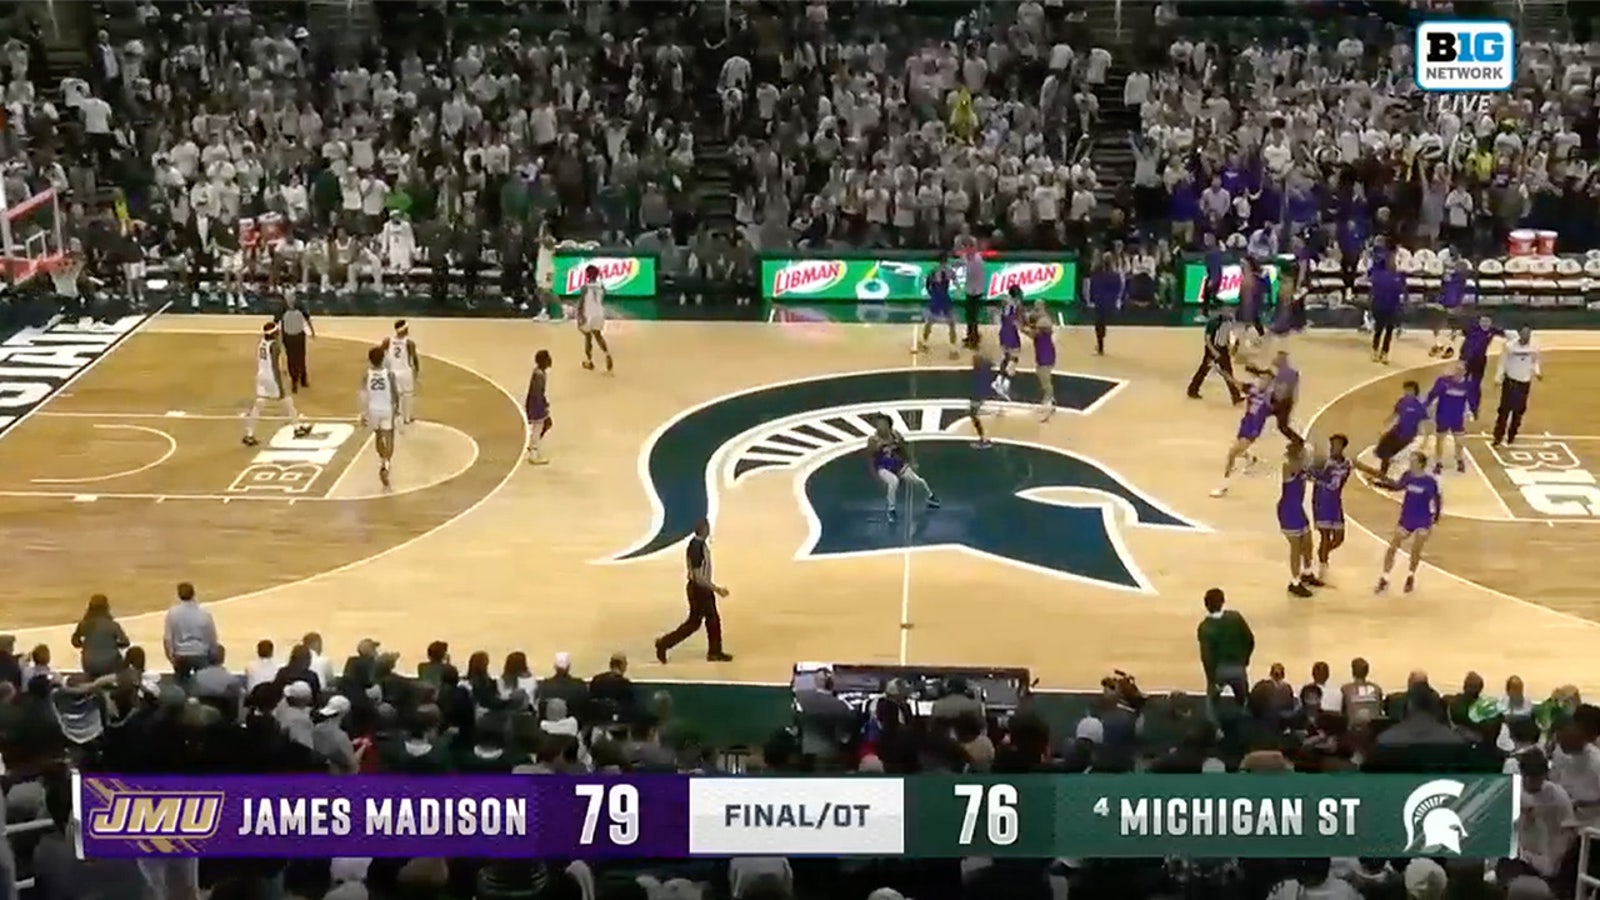 James Madison upsets No. 4 Michigan State, 79-76, in overtime